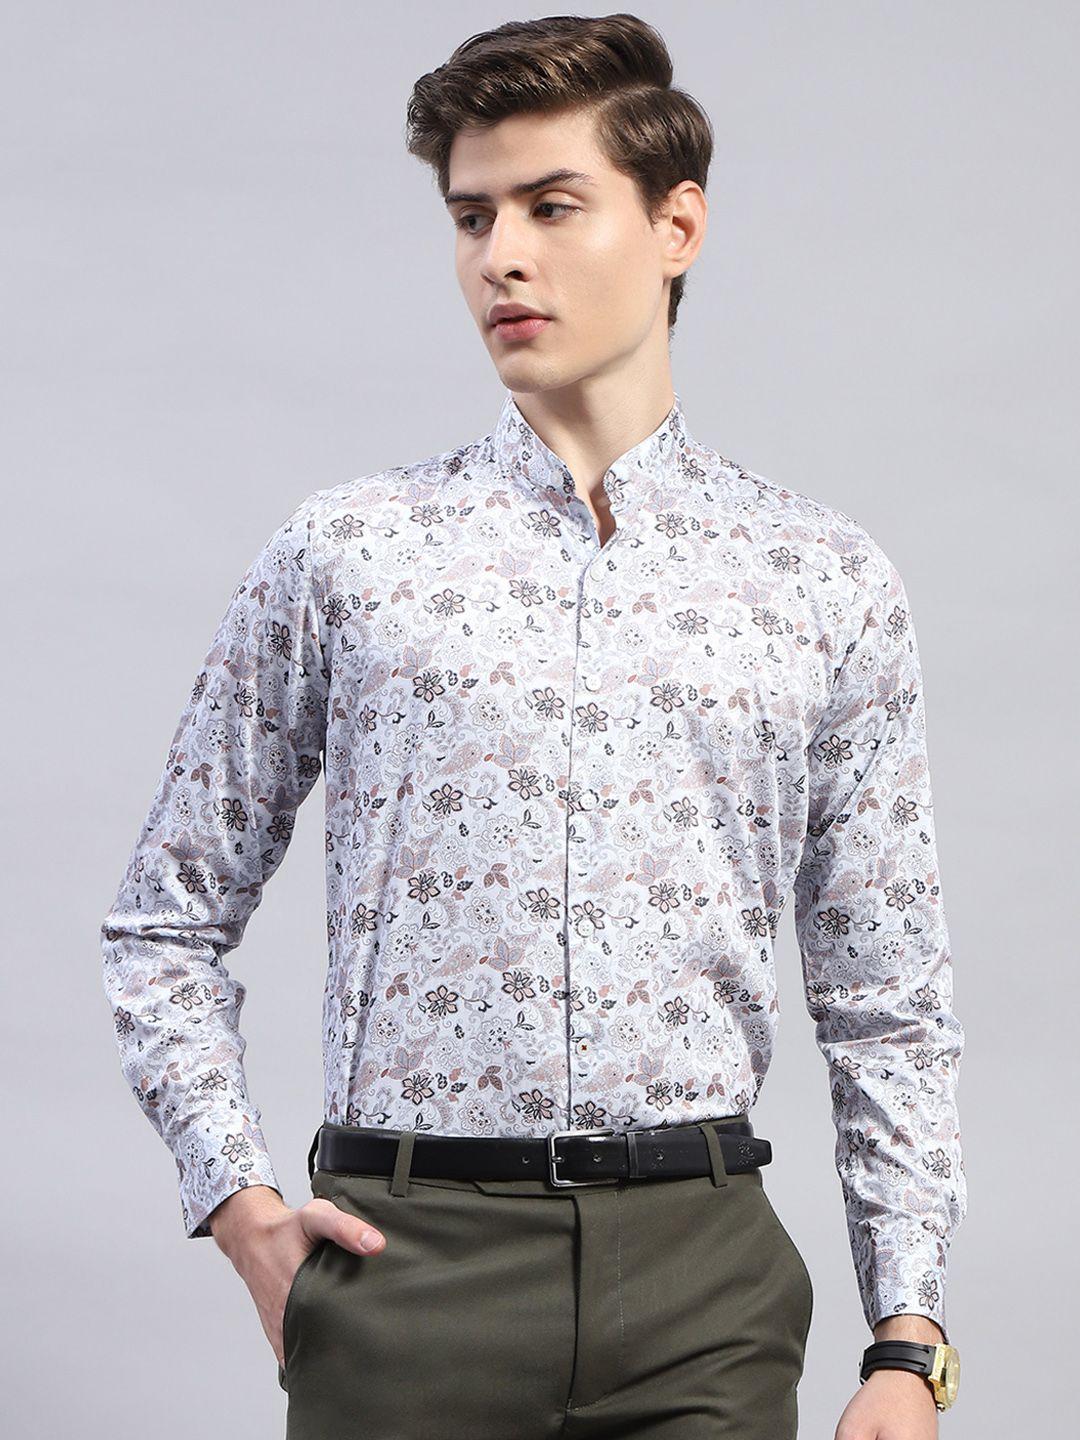 monte-carlo-men-classic-floral-opaque-printed-casual-shirt